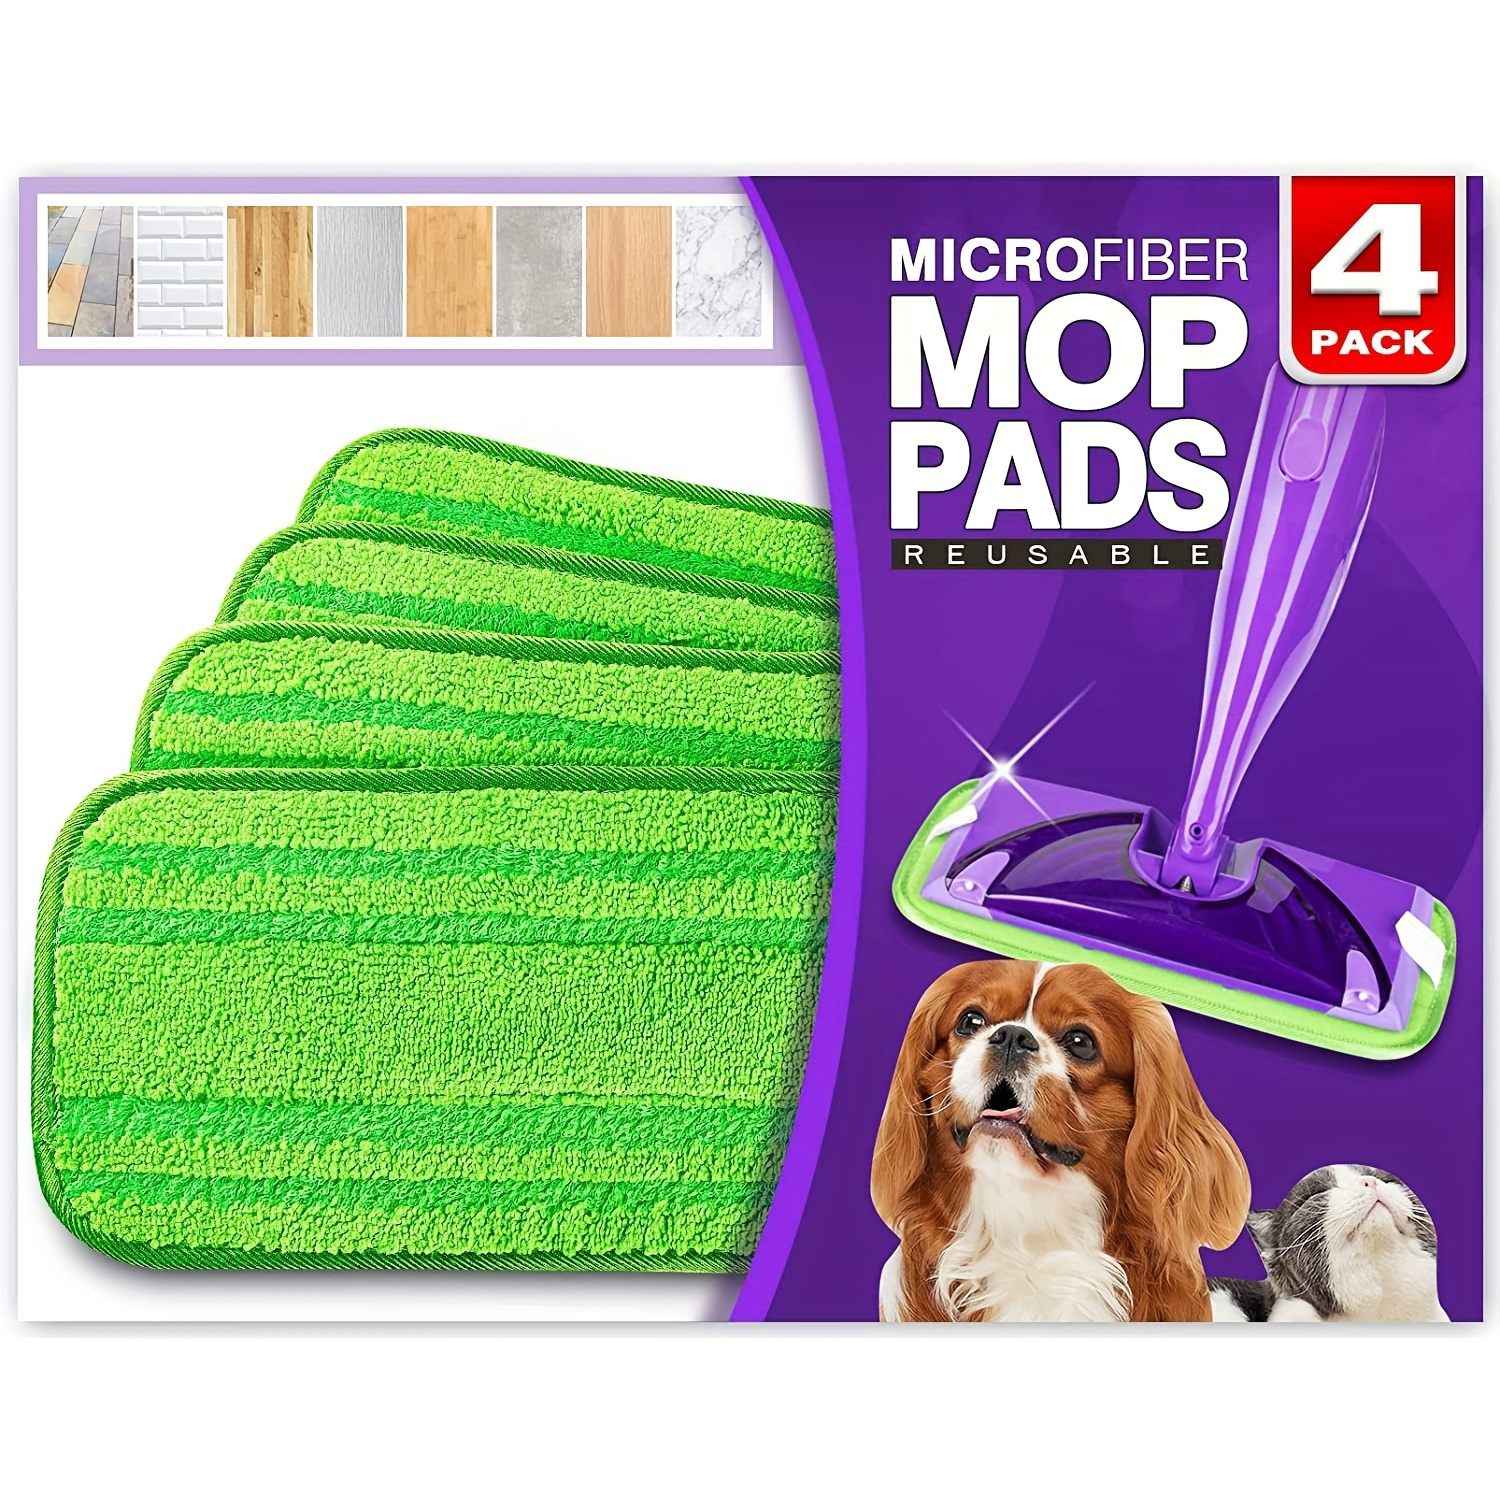 Set of 4 Microfiber Mop Pads Washable Durable Reuse Swiffer Pad